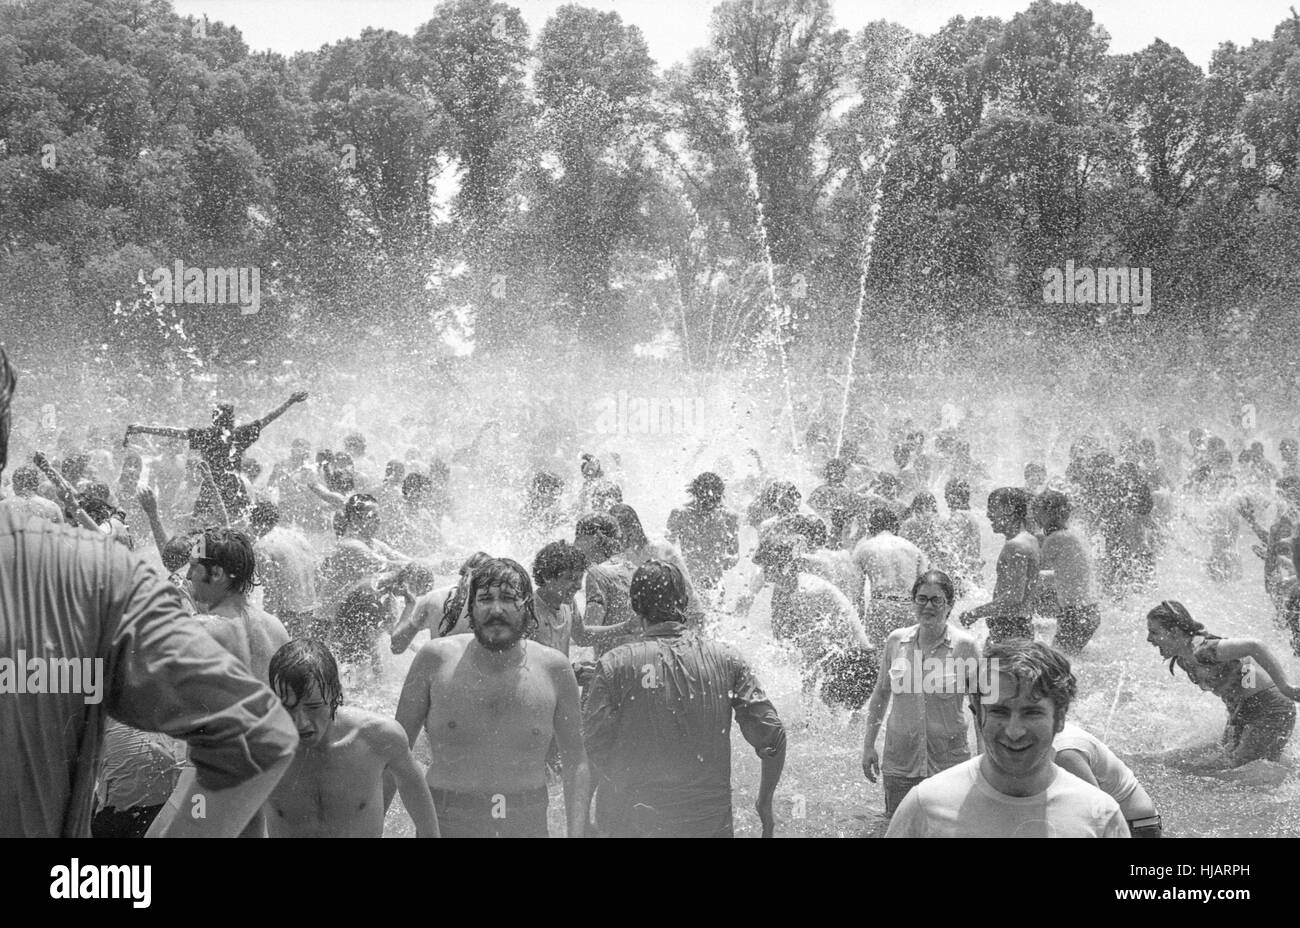 Protesters frolic in a fountain during the anti-war protest in Washington, DC, May 9, 1970. Stock Photo